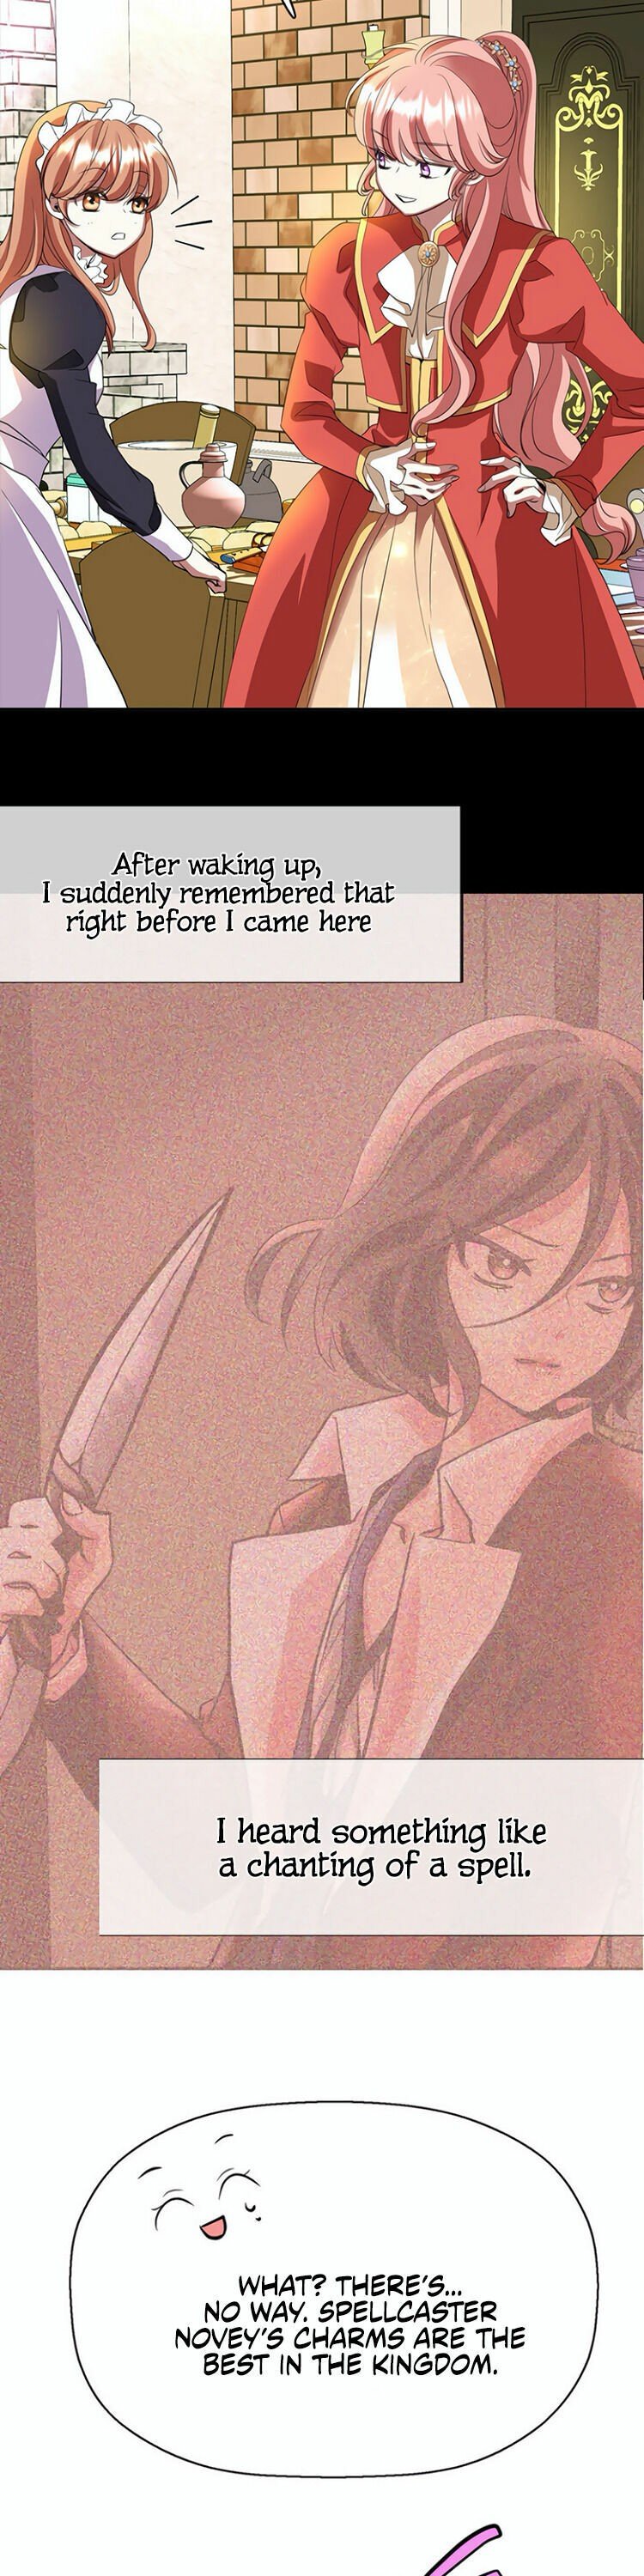 I’m a Killer but I’m Thinking of Living as a Princess Chapter 8 - Page 4